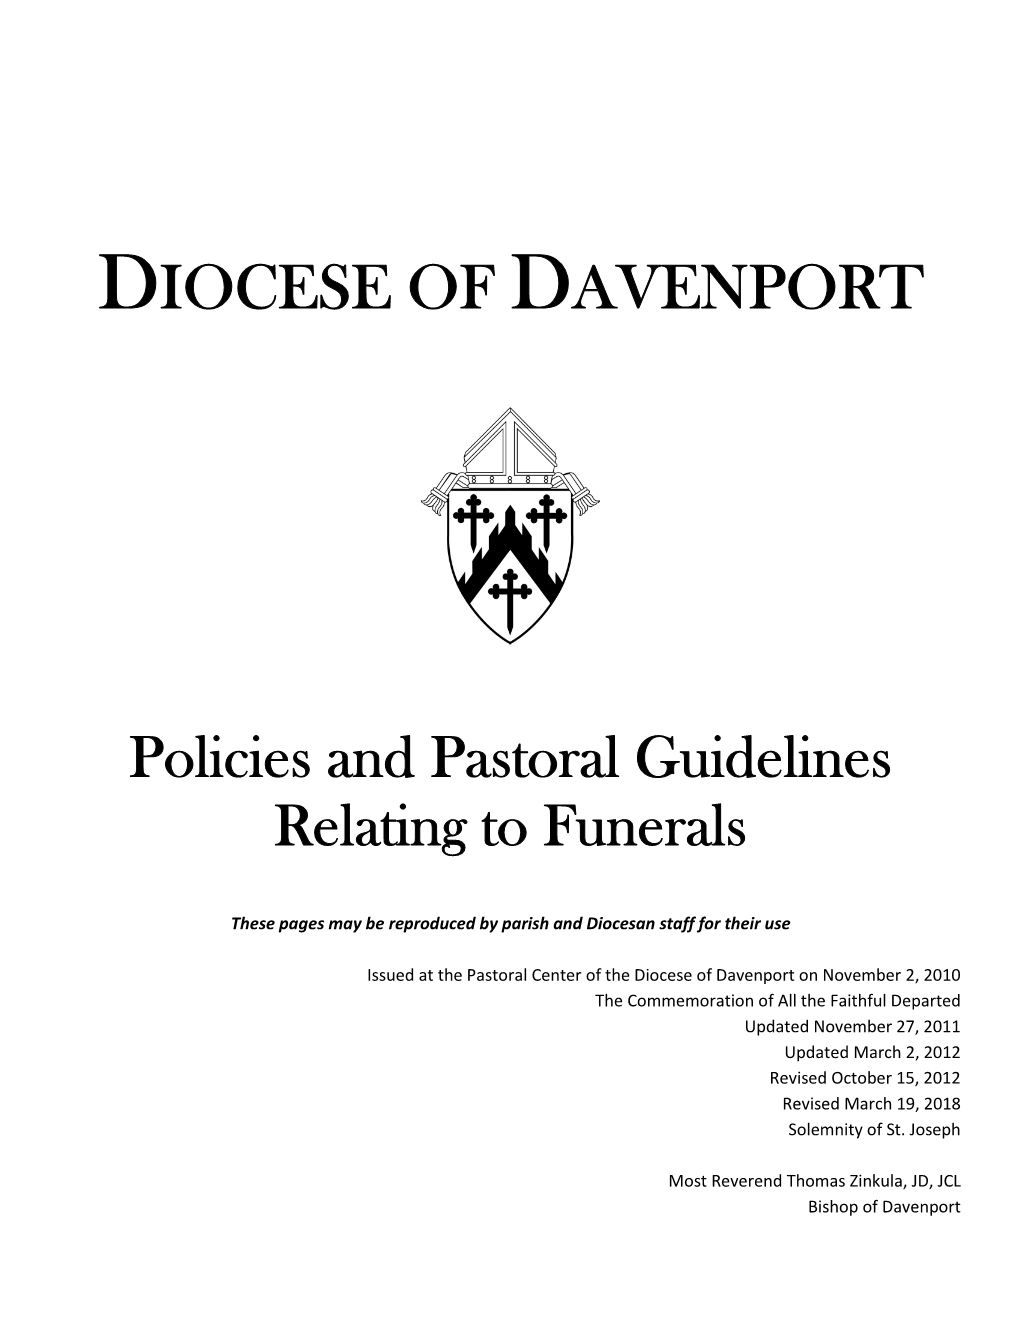 Funeral Policies and Pastoral Guidelines